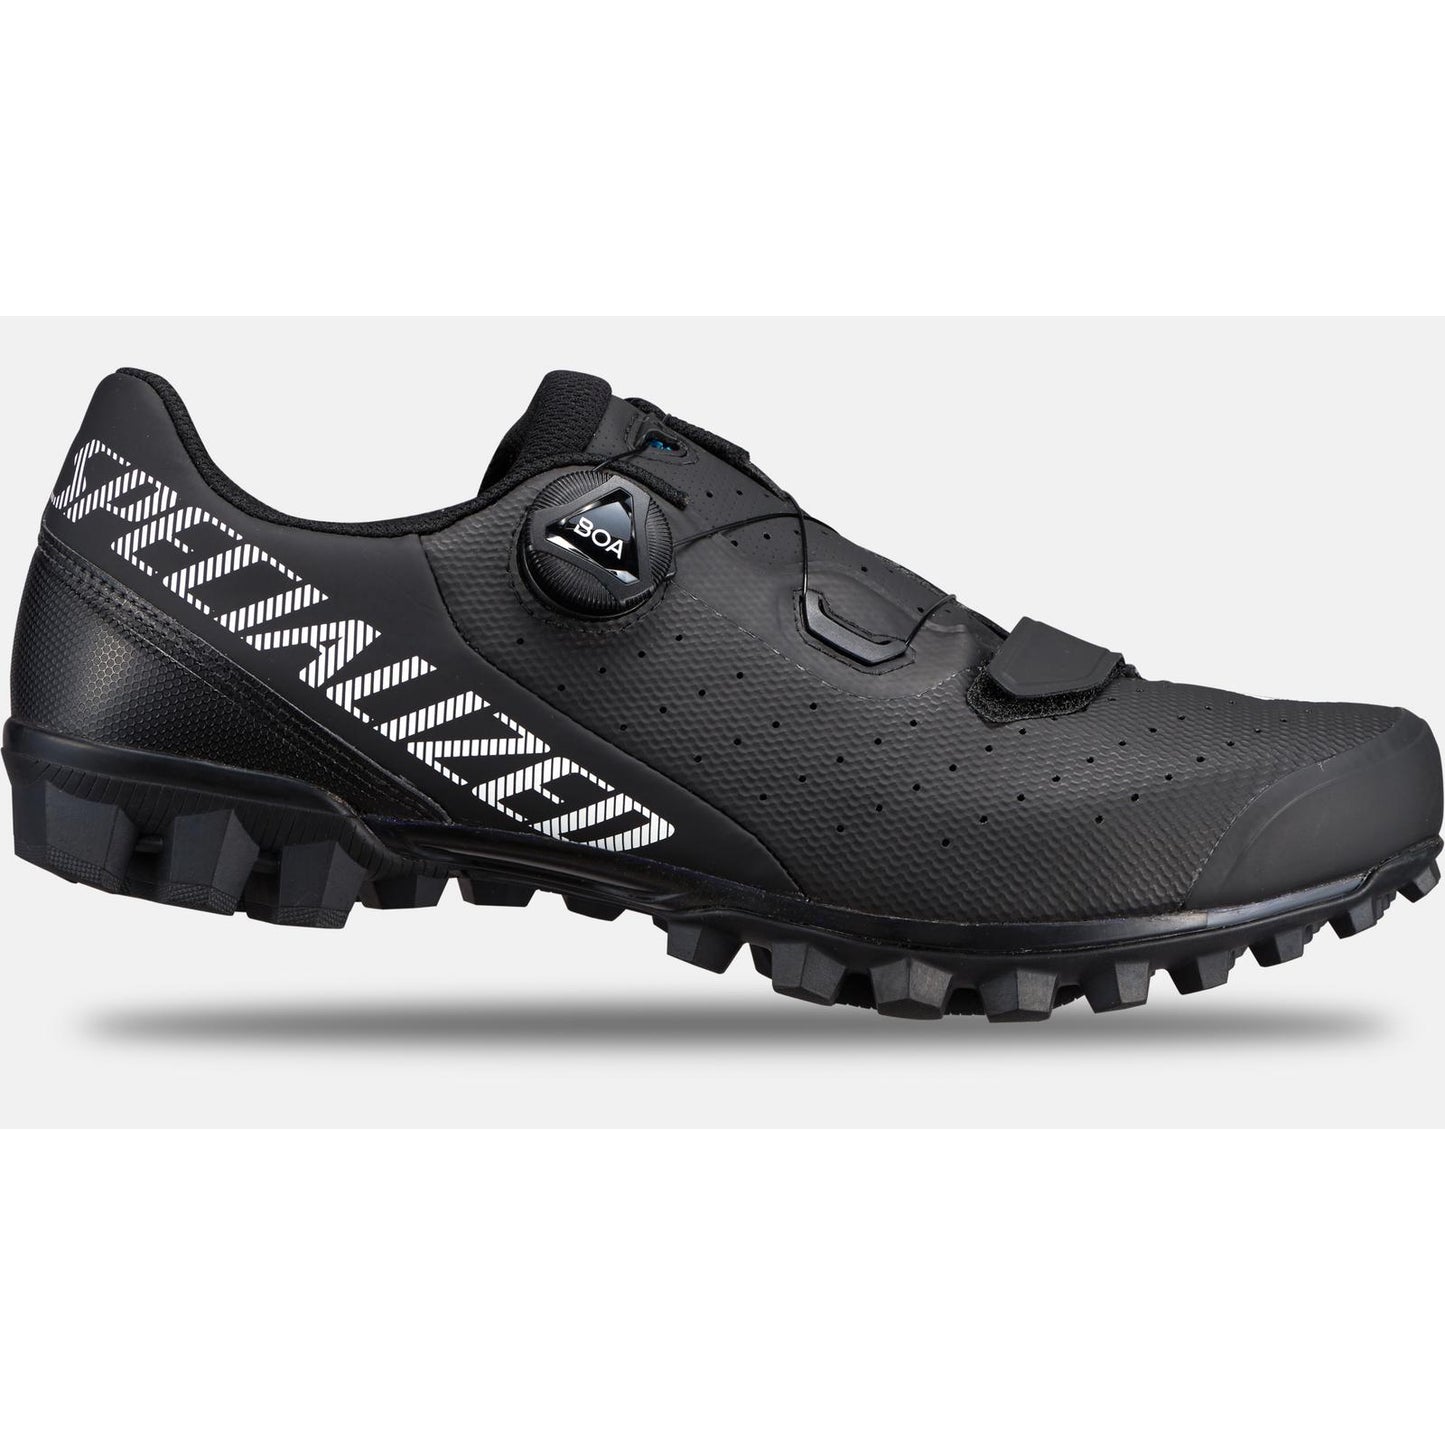 Specialized Recon 2.0 Mountain Bike Shoes - Shoes - Bicycle Warehouse